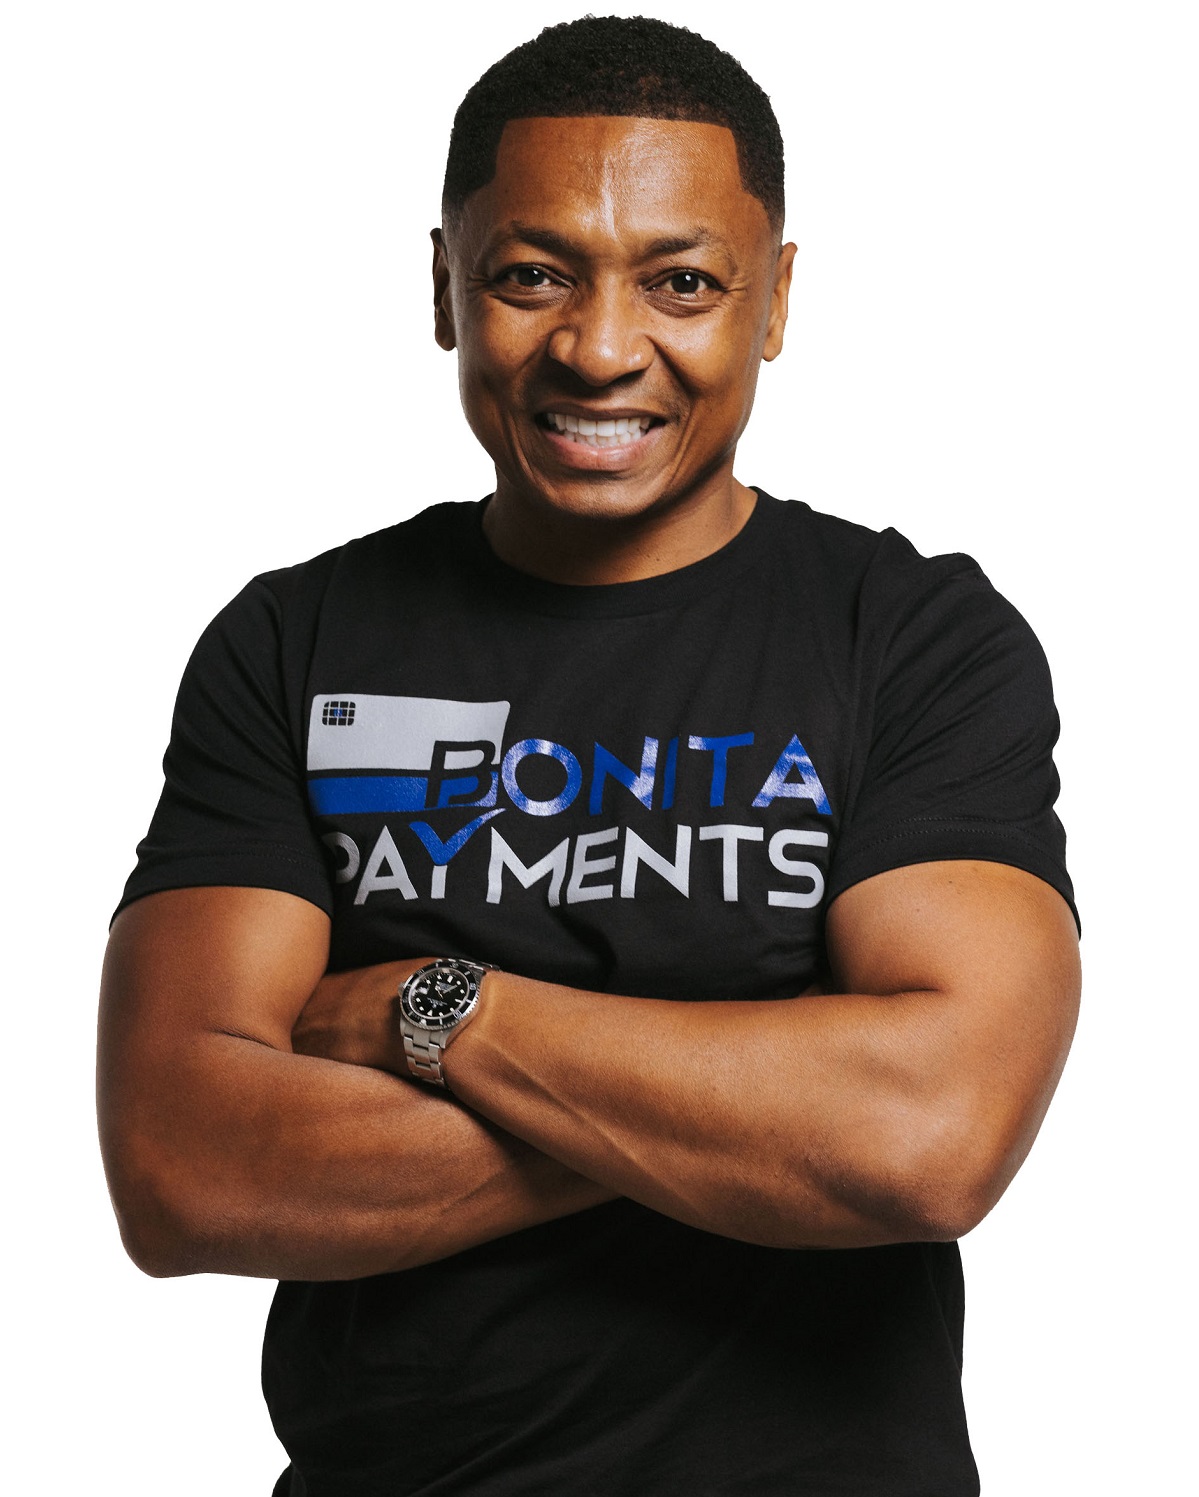 Meet Elliott Forman, Founder of Bonita Payments and a Man of Many Passions